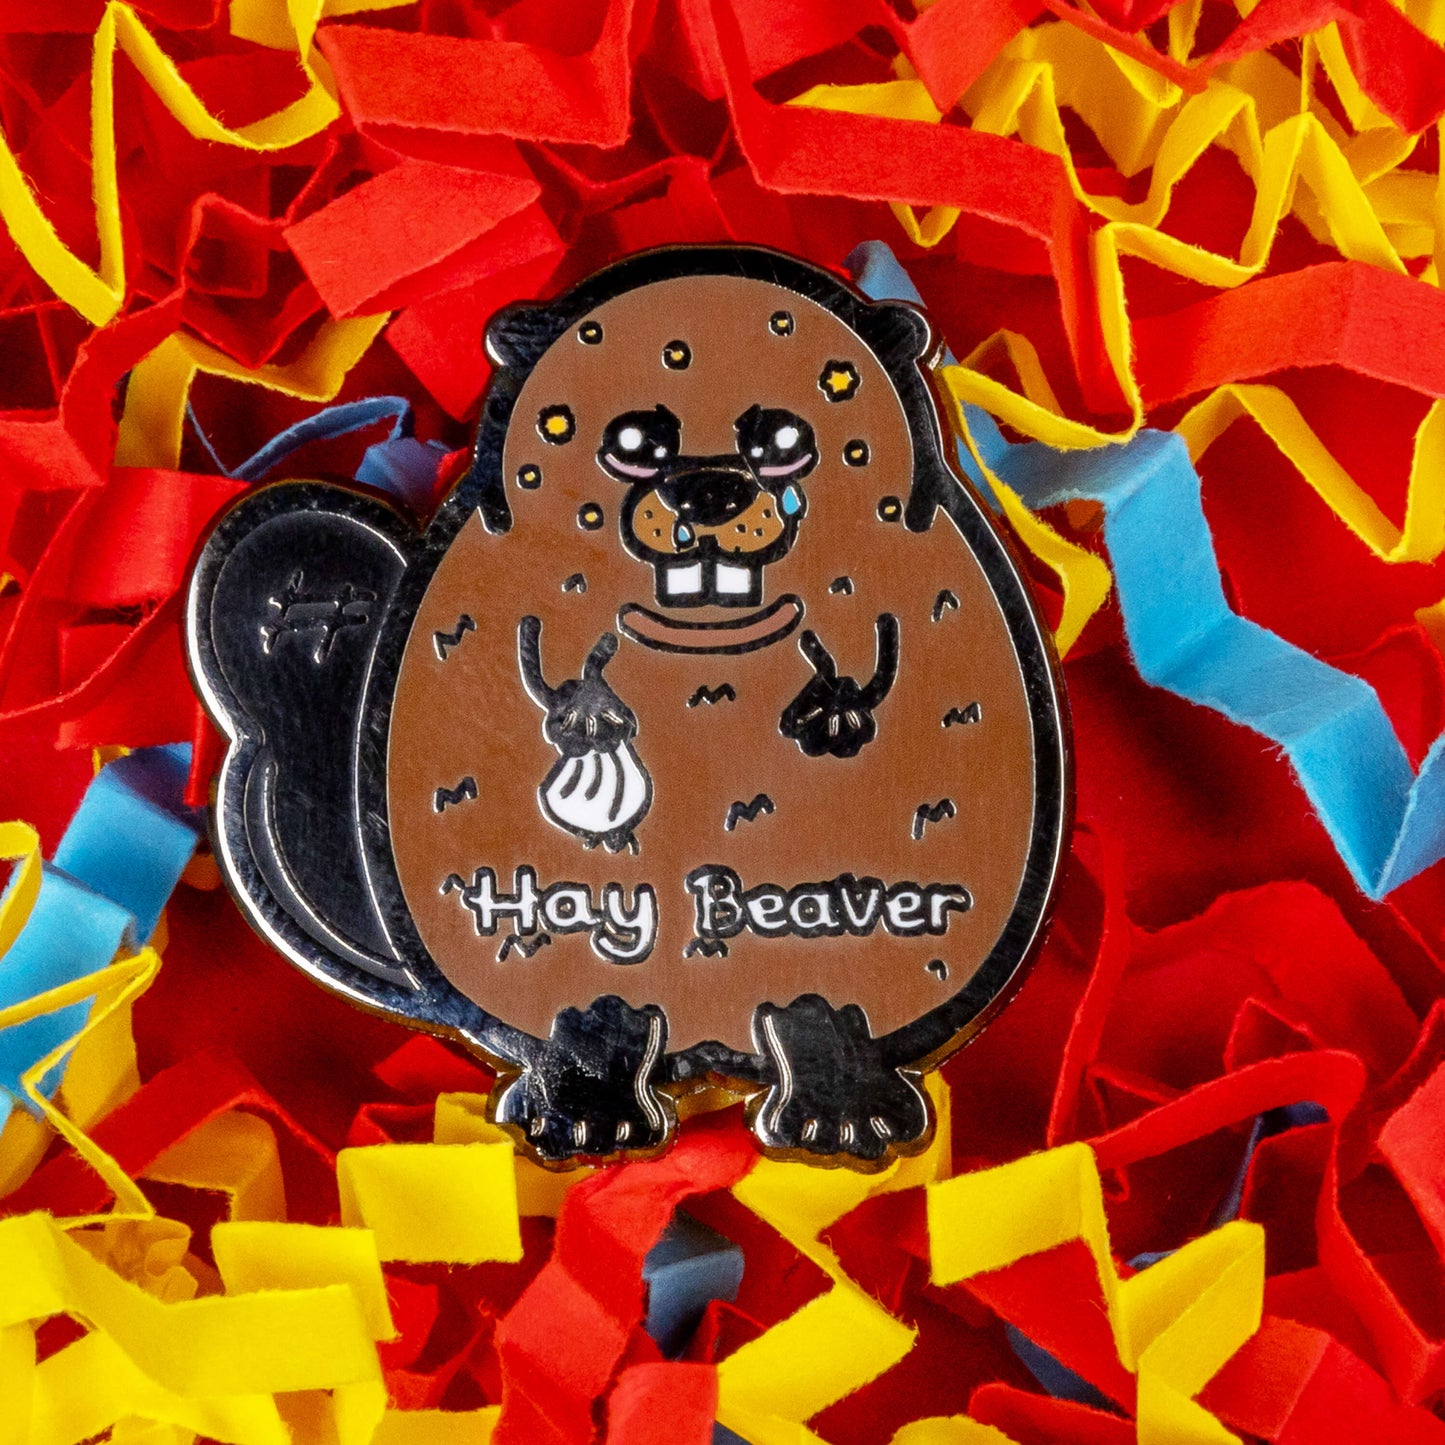 Hay Beaver Enamel Pin - Hay Fever on a blue, yellow and red coloured card confetti background. The enamel pin is a brown beaver with watery eyes, dripping nose and yellow spots on face and is holding a tissue with it's little hand. Hay beaver is written across its belly. The enamel pin is designed to raise awareness for hay fever or allergic rhinitis